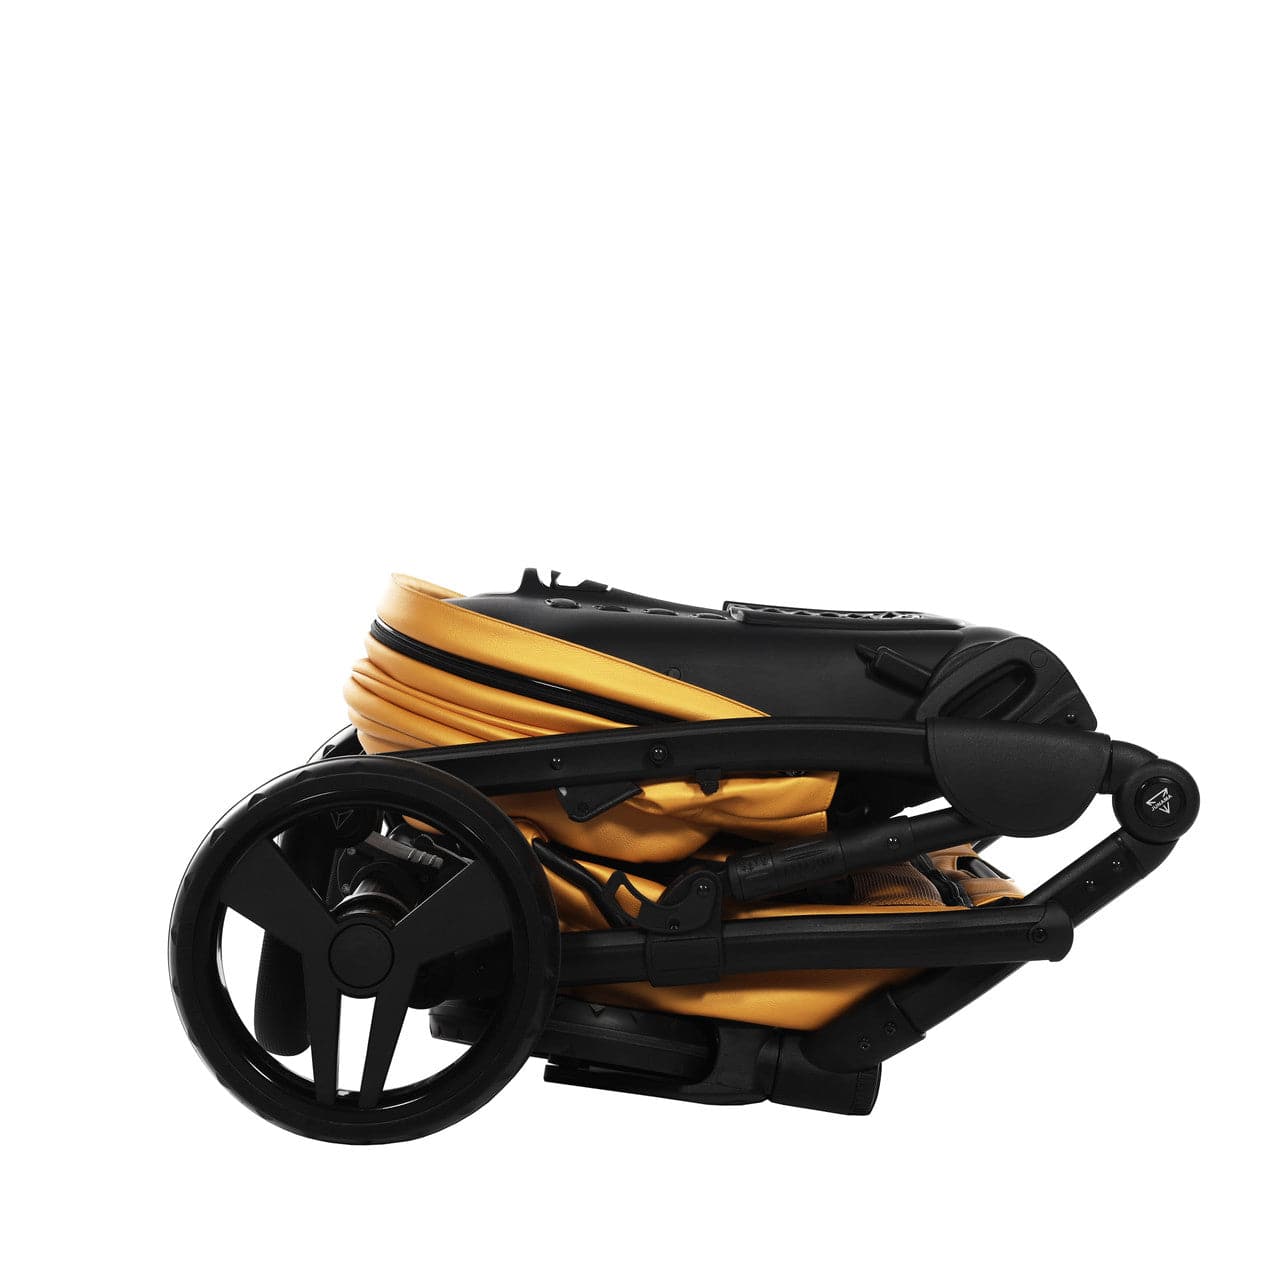 Junama S-Class 2 In 1 Pram - Yellow - For Your Little One